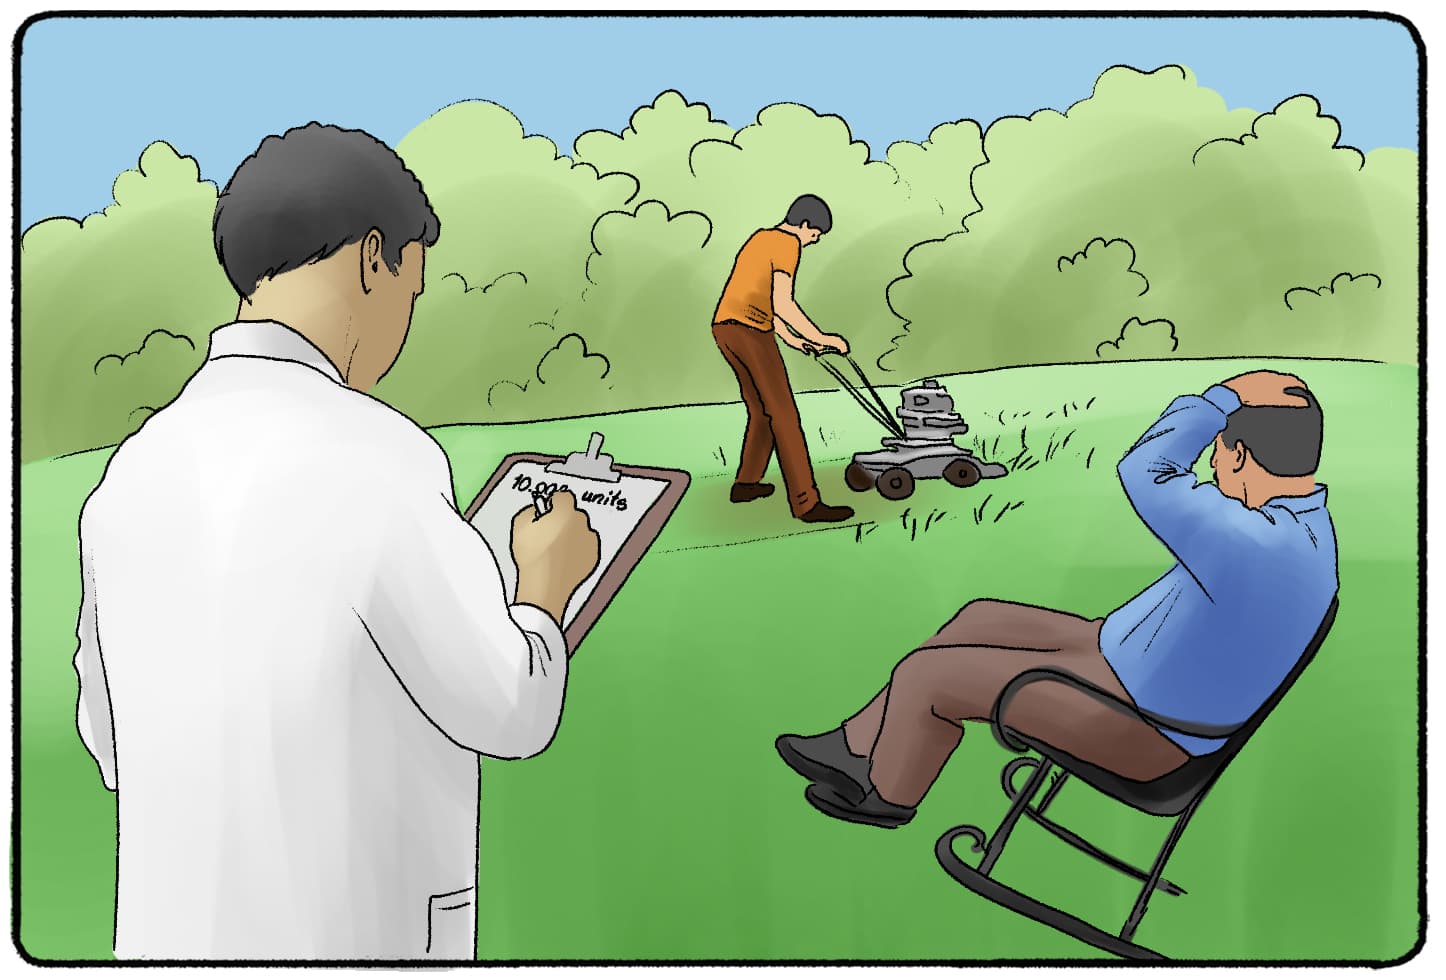 researcher watching a man watching another man mowing the lawn